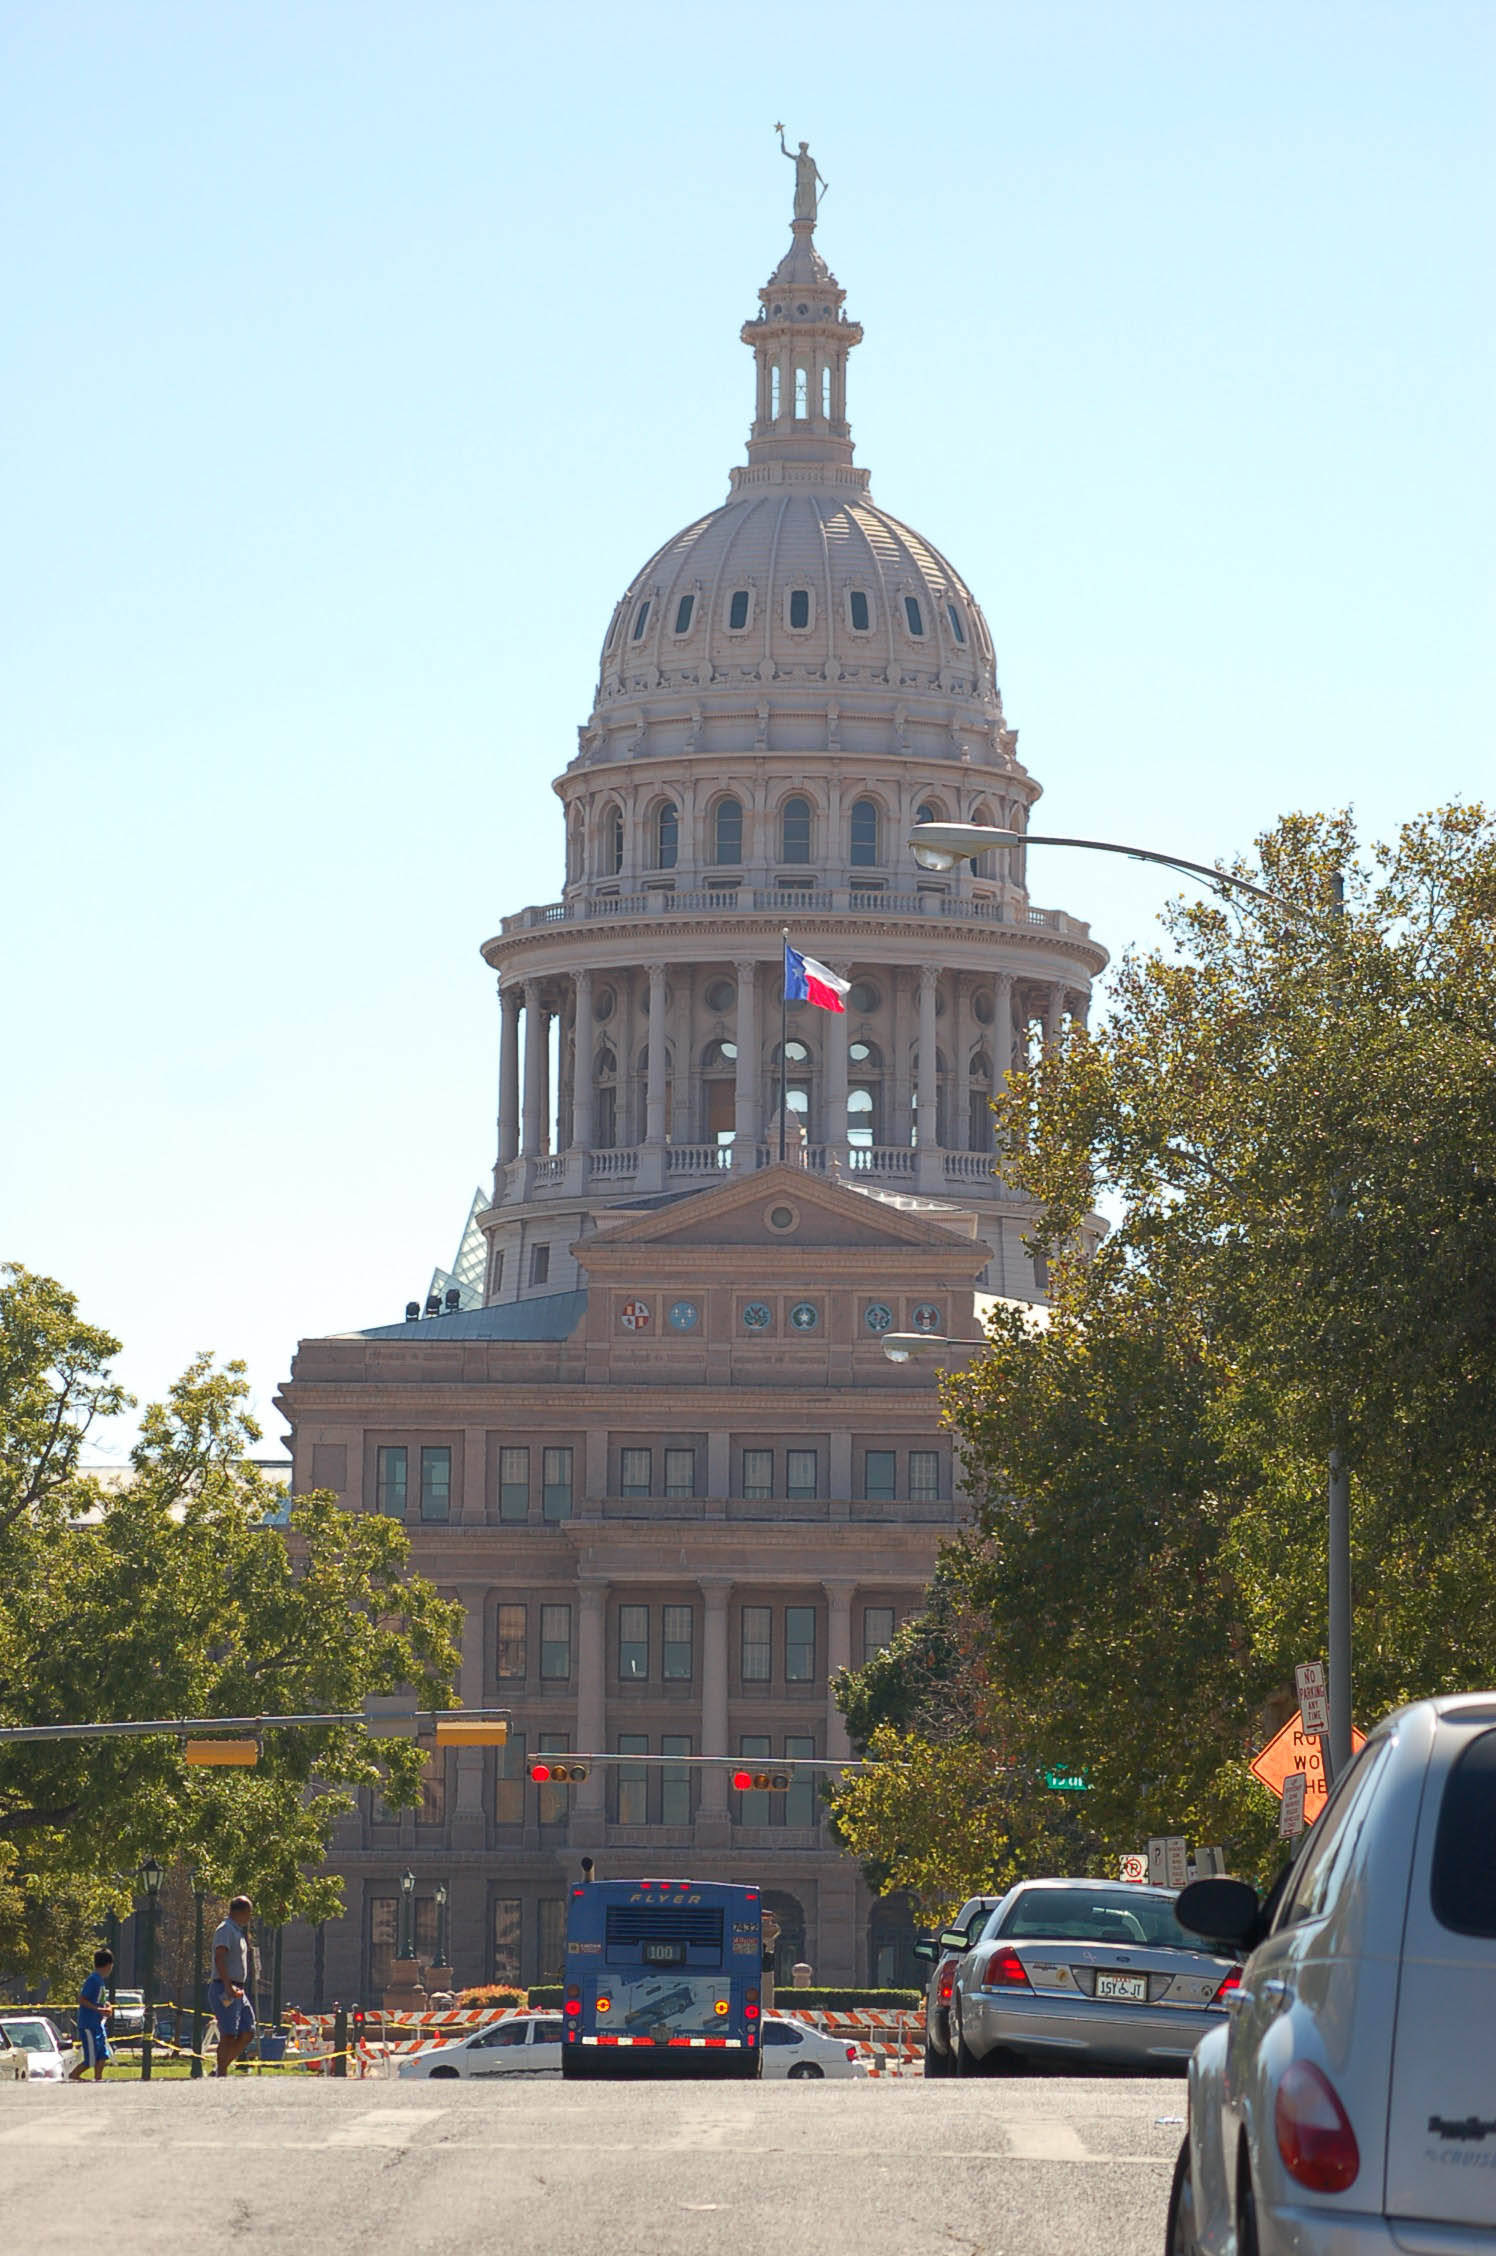 The Capitol Building in Austin